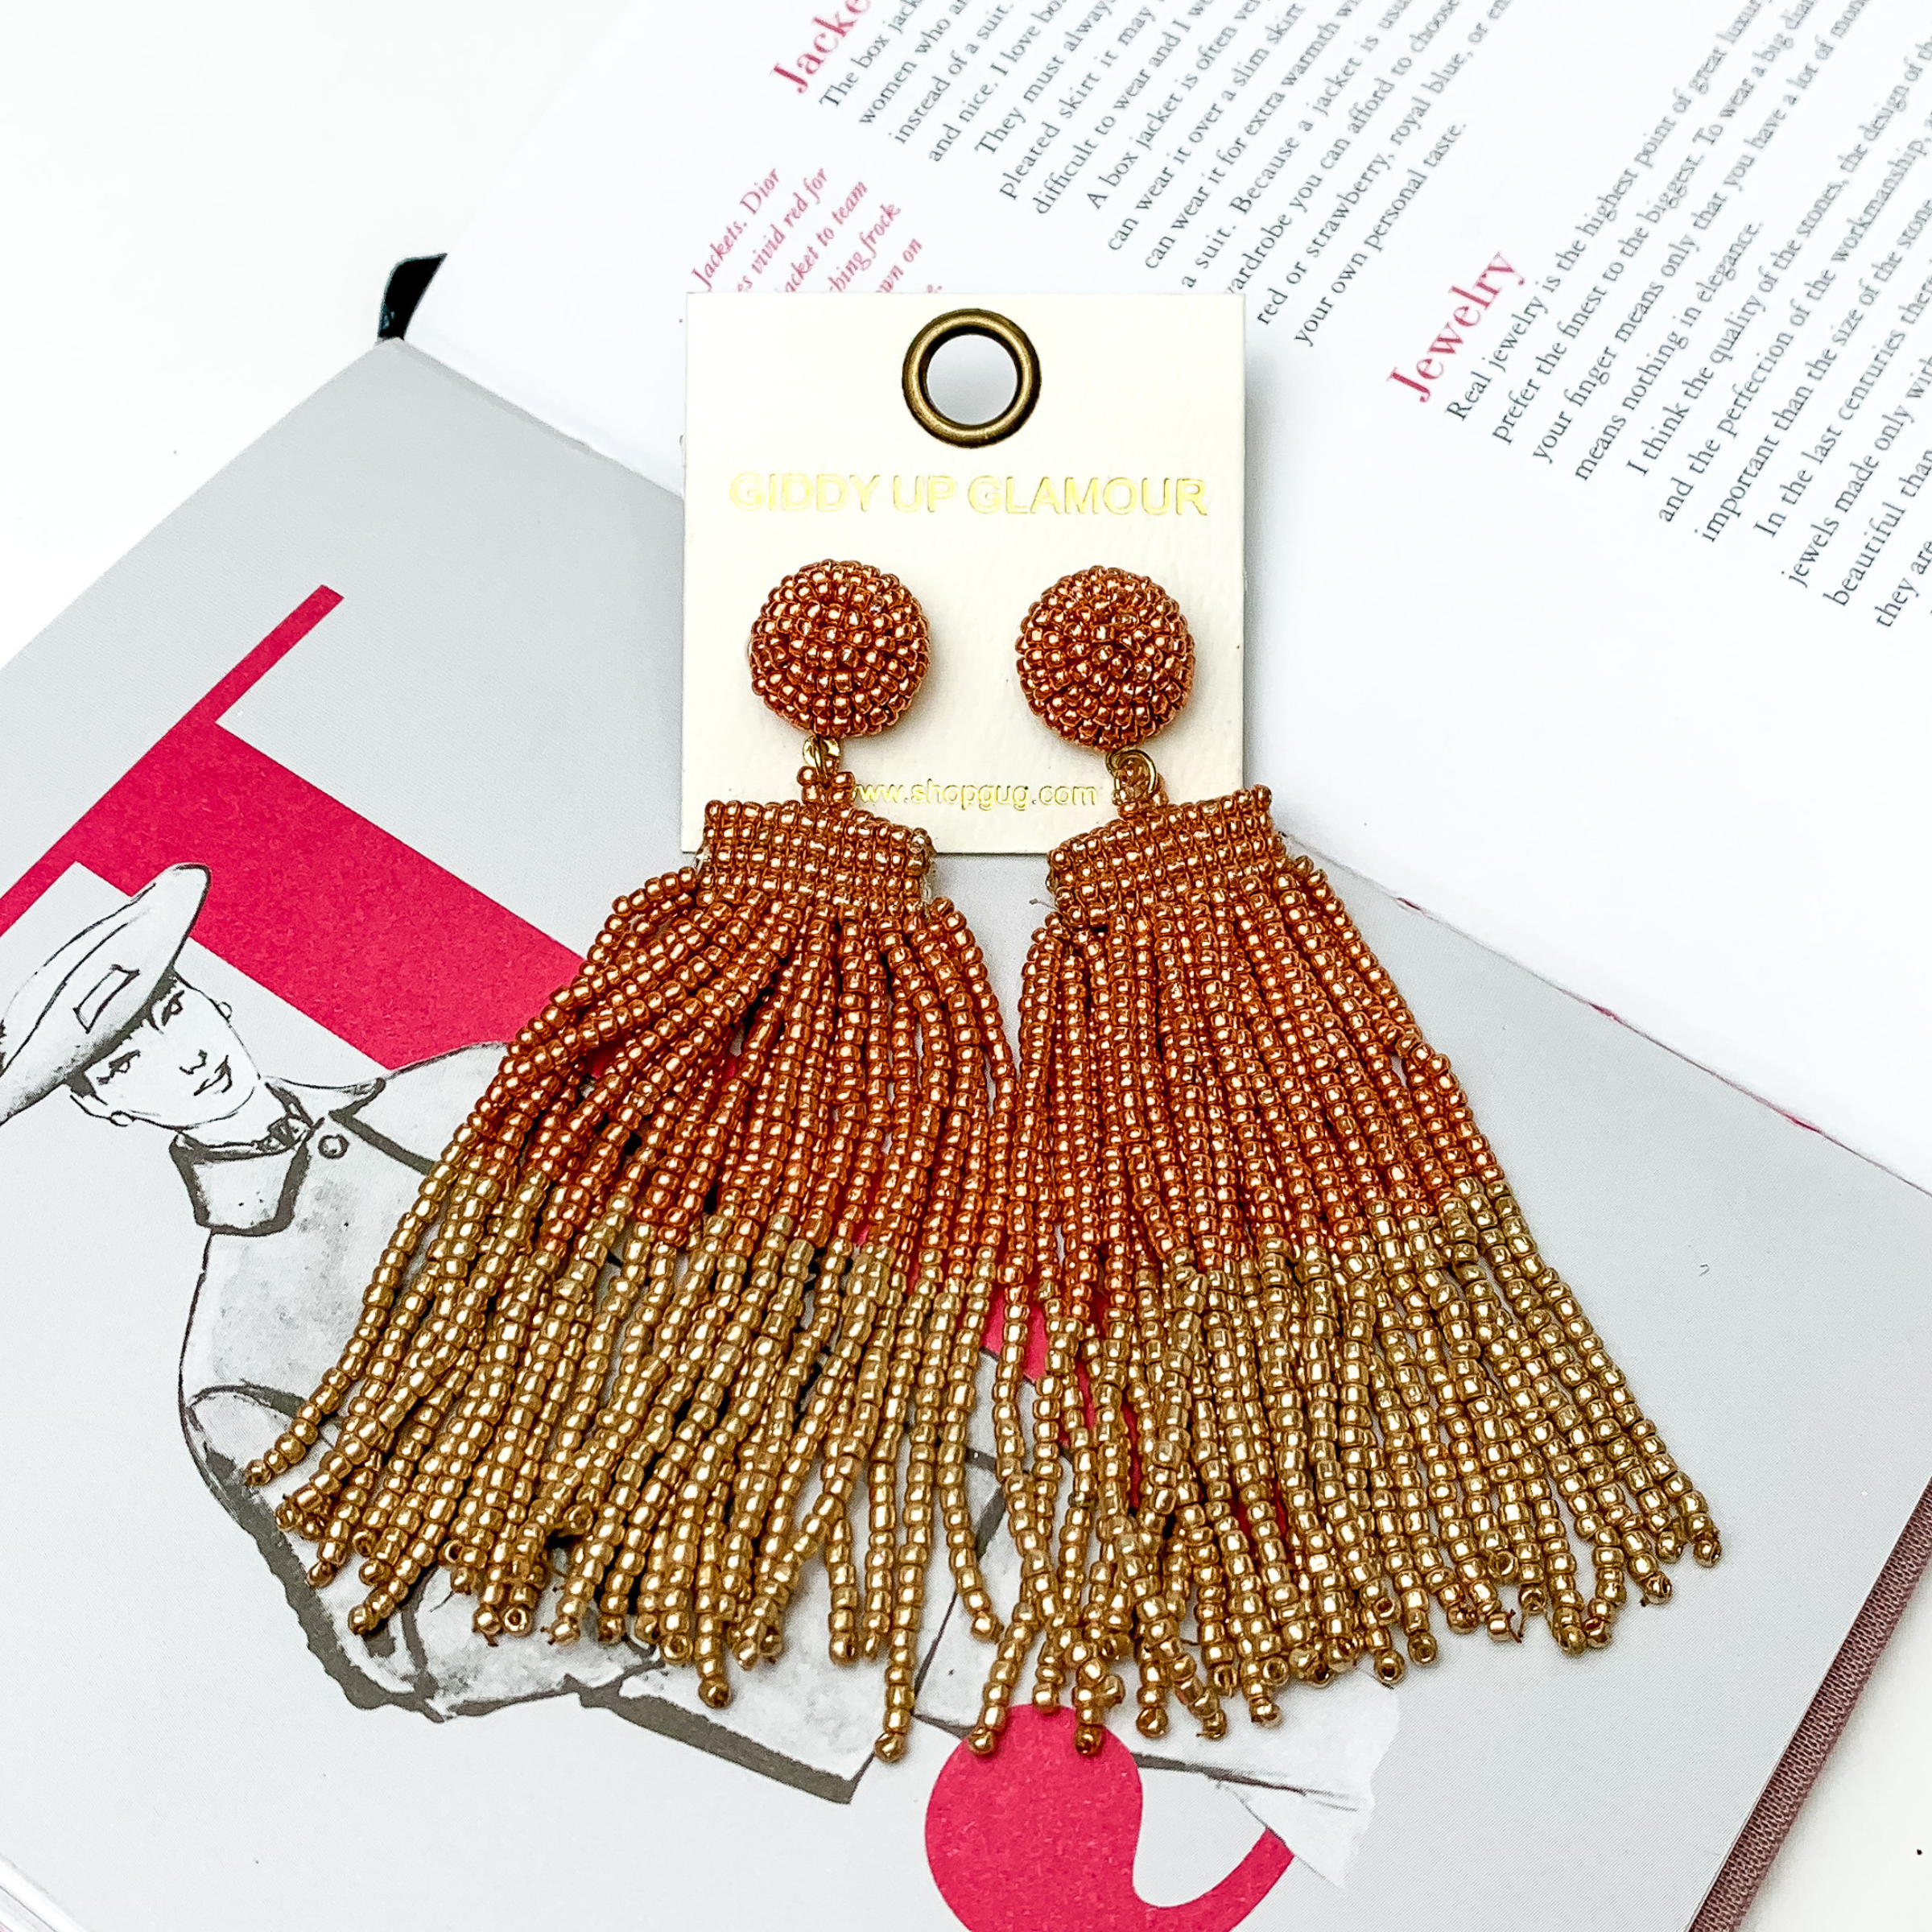 These are circle post back, beaded earrings in rose gold with a hanging beaded tassel. The tassel is half rose gold and half gold. These earrings are pictured on top of an open book on a white background. 